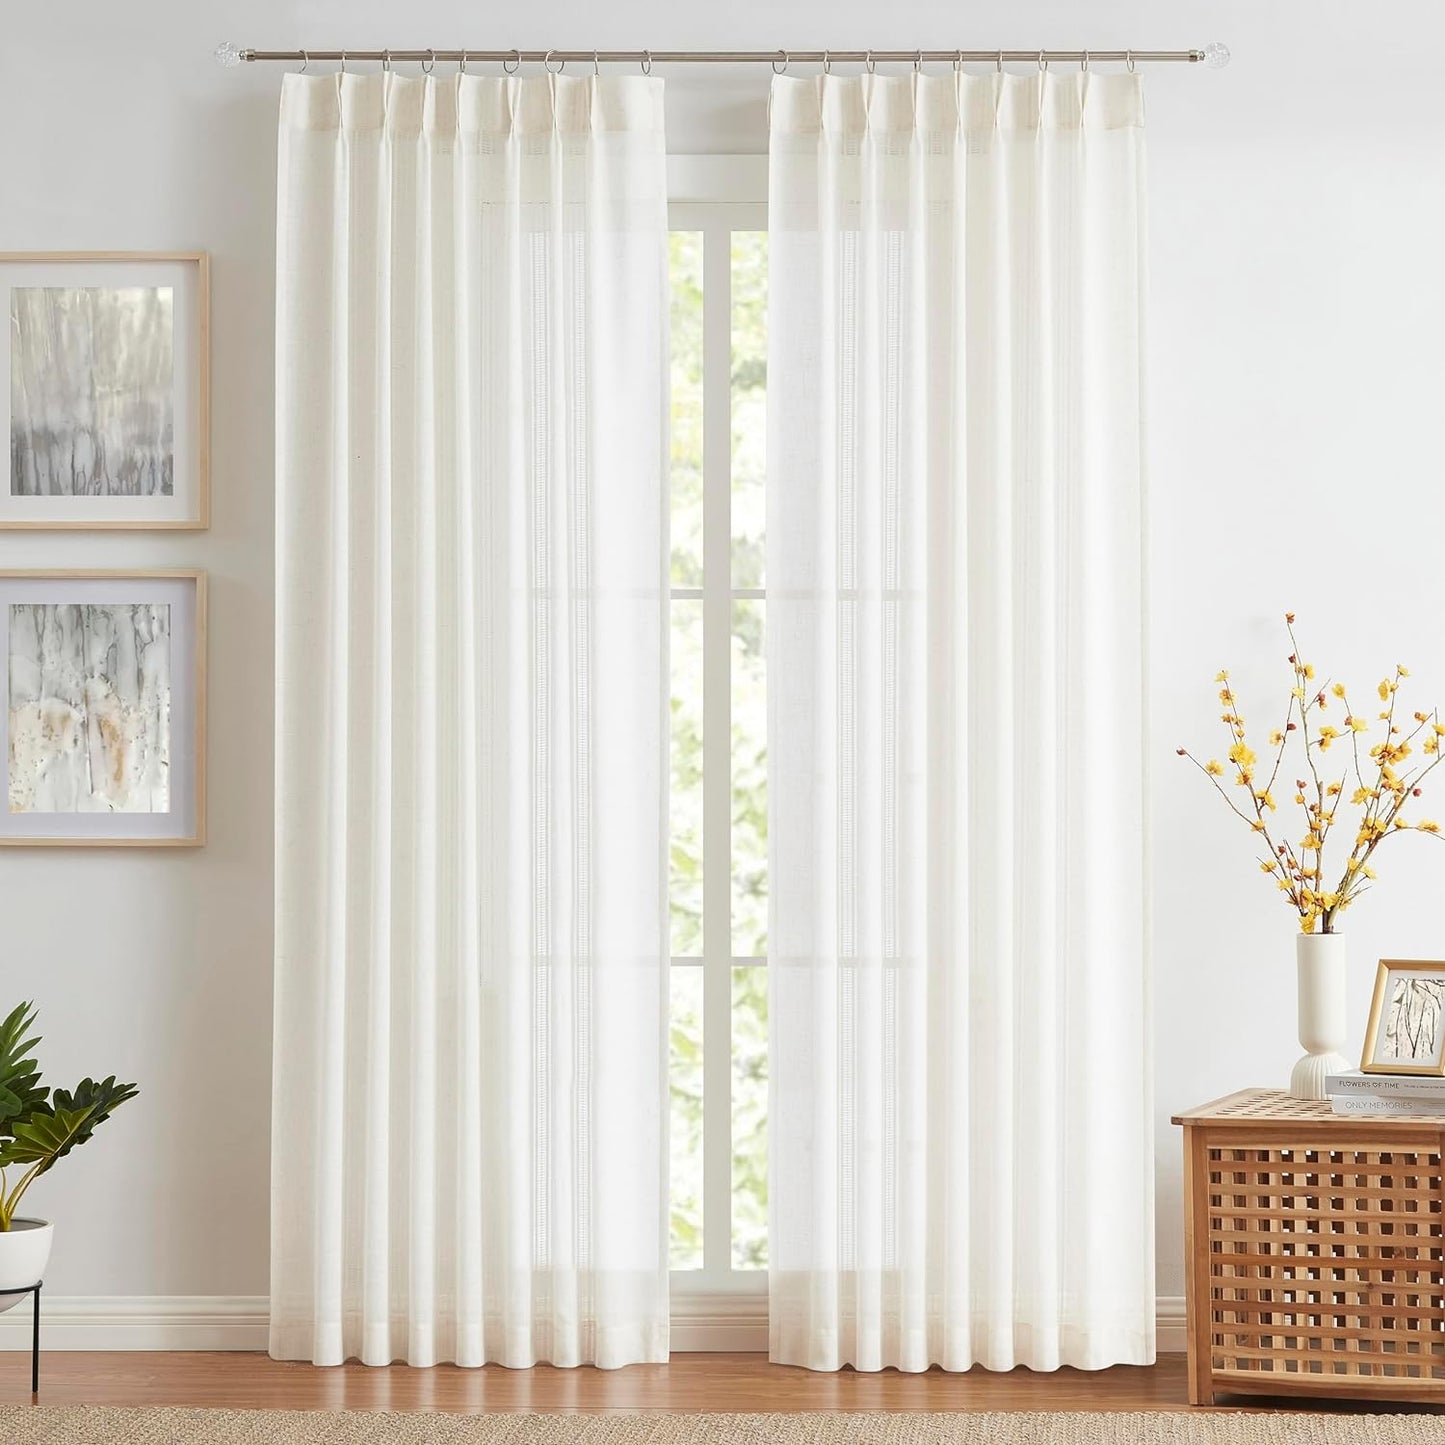 Kayne Studio Boho 2 Pages Sheer Pinch Pleated Curtains,Linen Blended 95 Inches Long Window Treatments,Light Filtering Pinch Pleat Drapes for Farmhouse Living Room 36" W X 90" L,18 Hooks,Beige  Kayne Studio Natural 36"X84"X2 